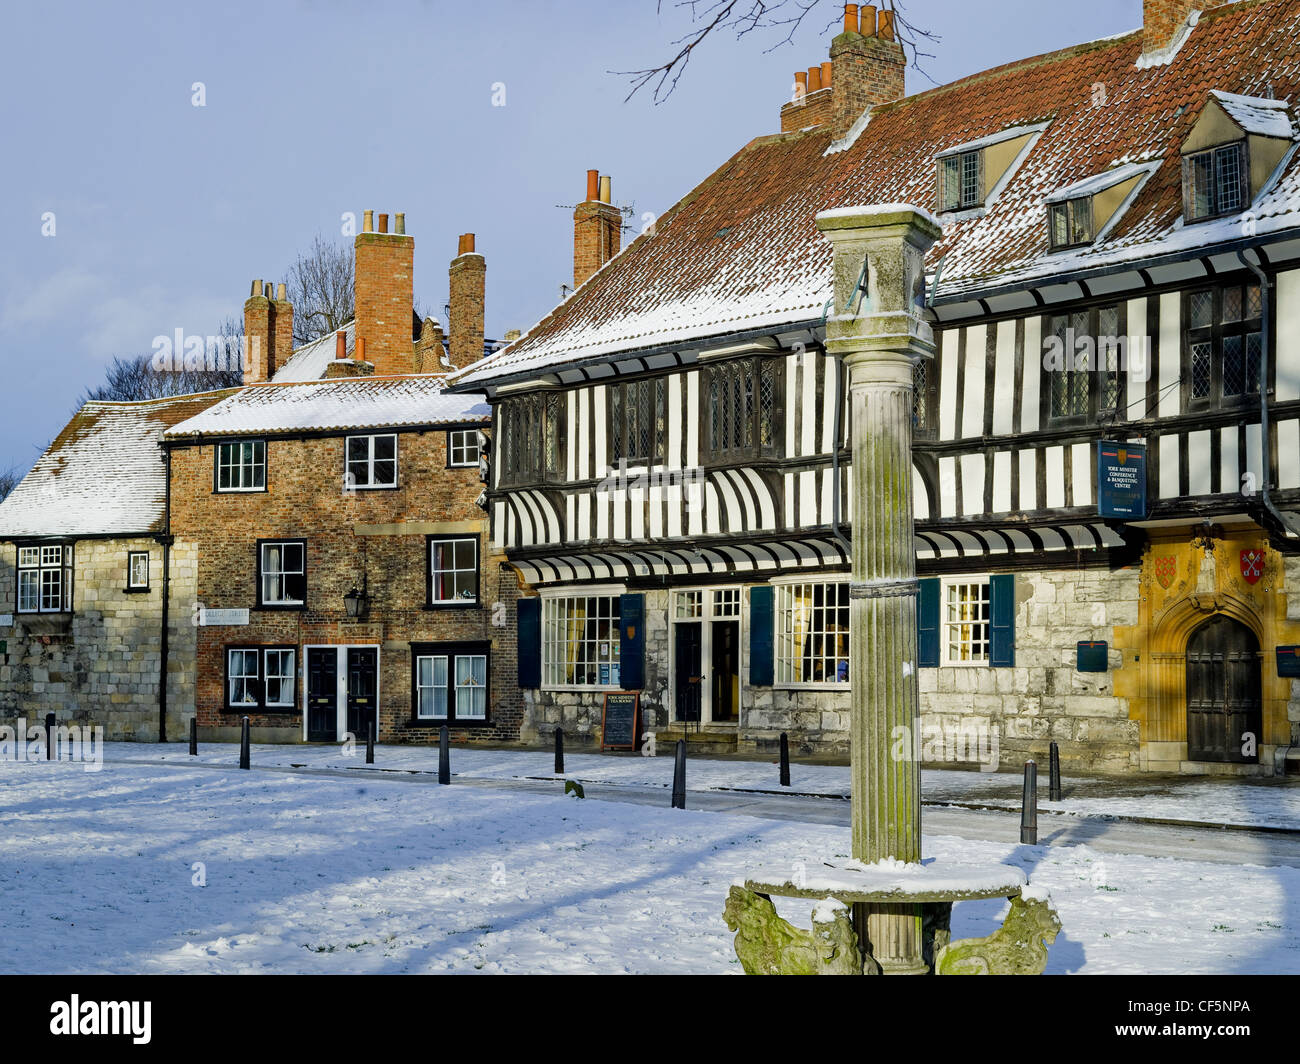 Snow covering the ground around the Sundial in front of St Williams College close to York Minster. Stock Photo